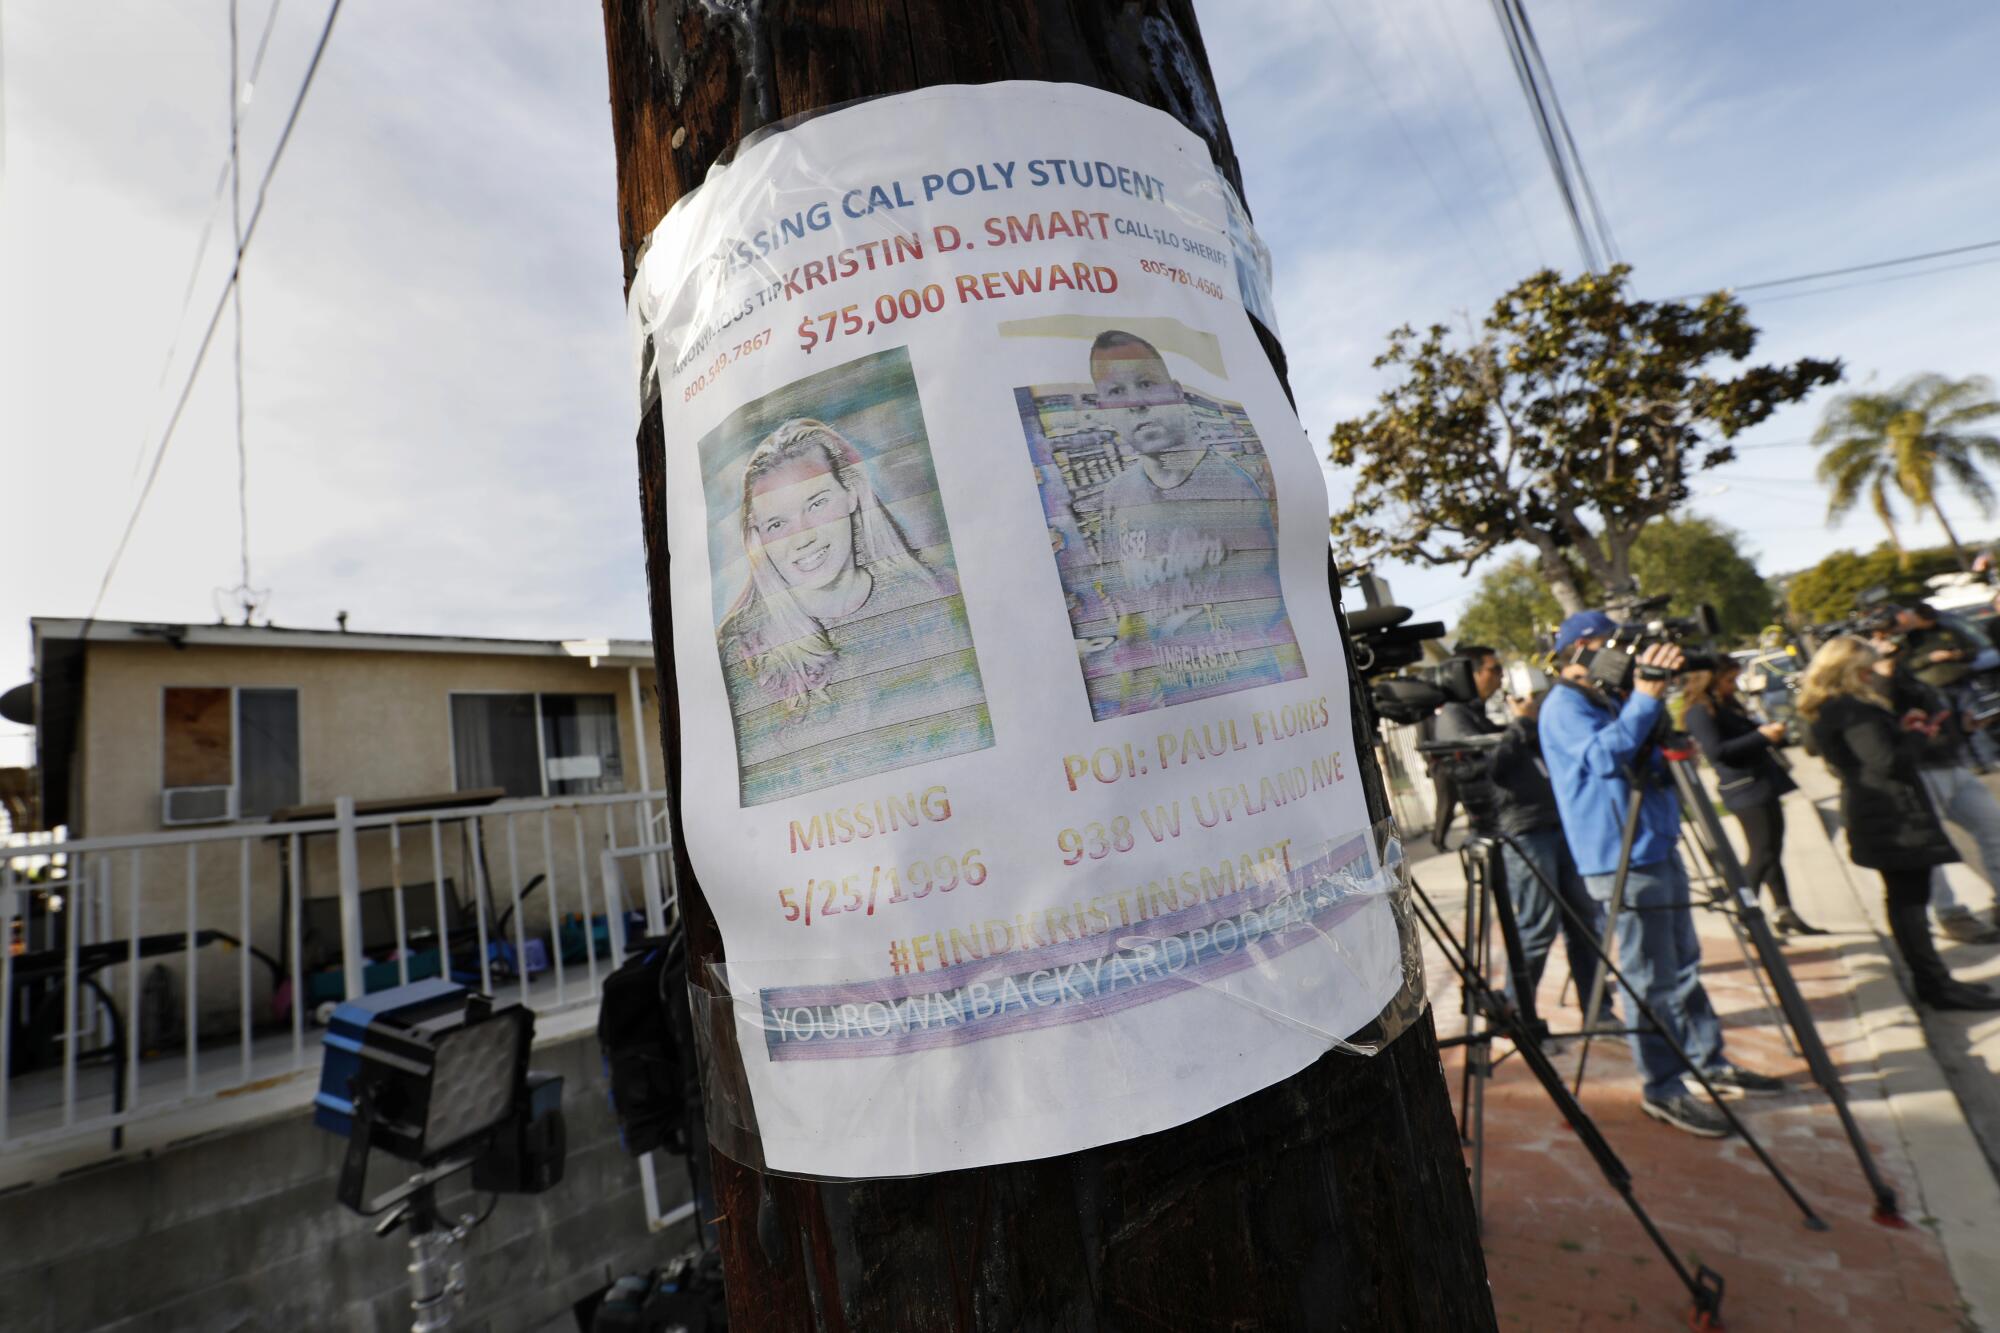 A missing-person flier on a pole.